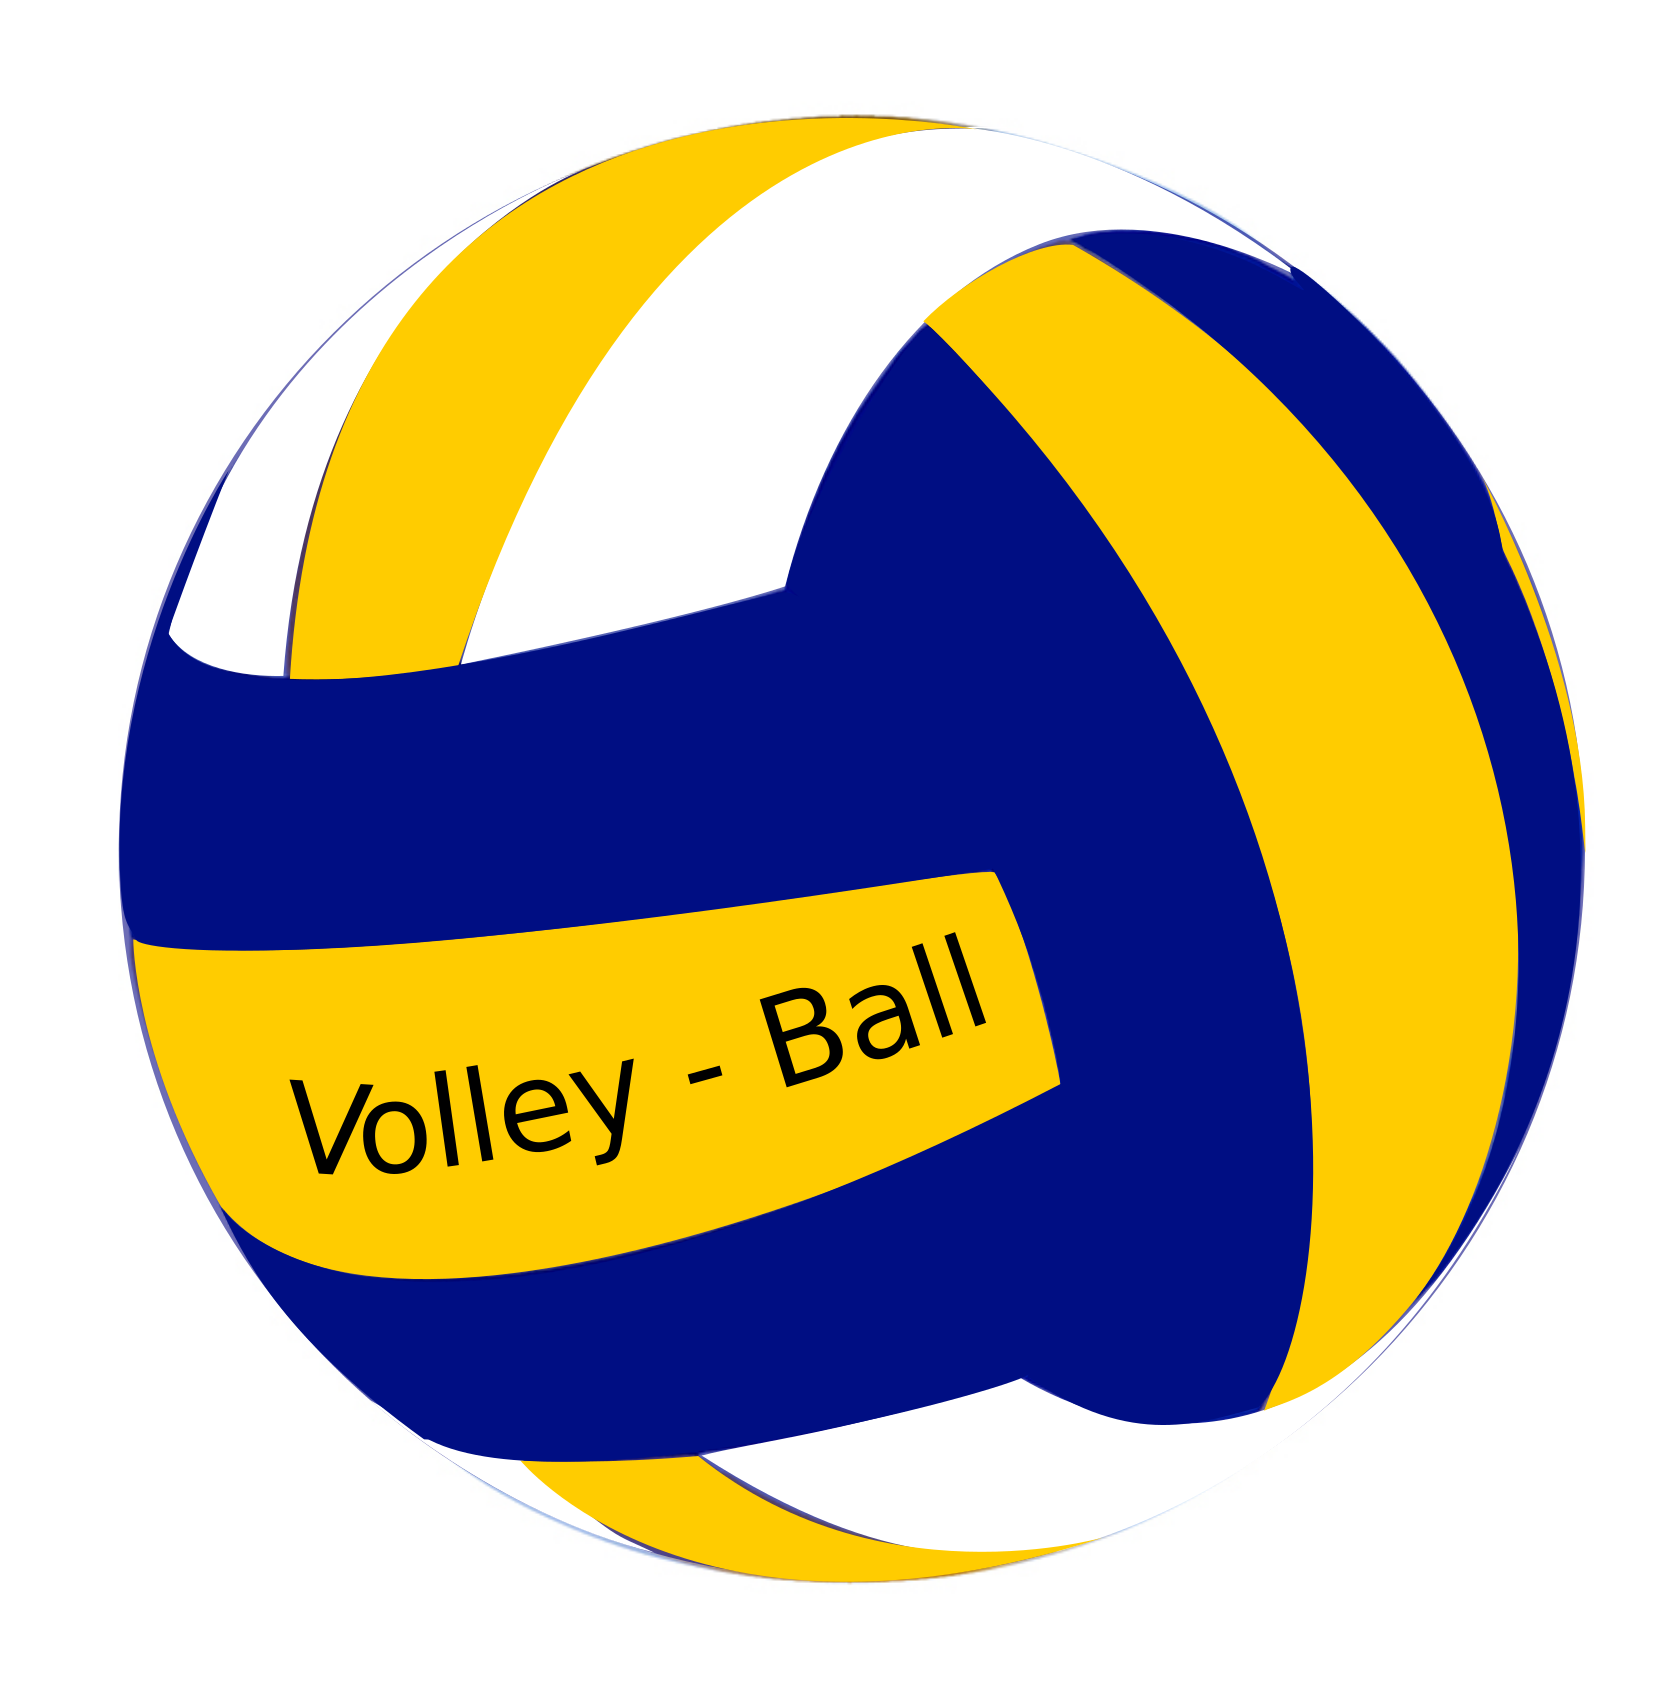 Volleyball Female Ball - Volleyball Png (1697x2400)